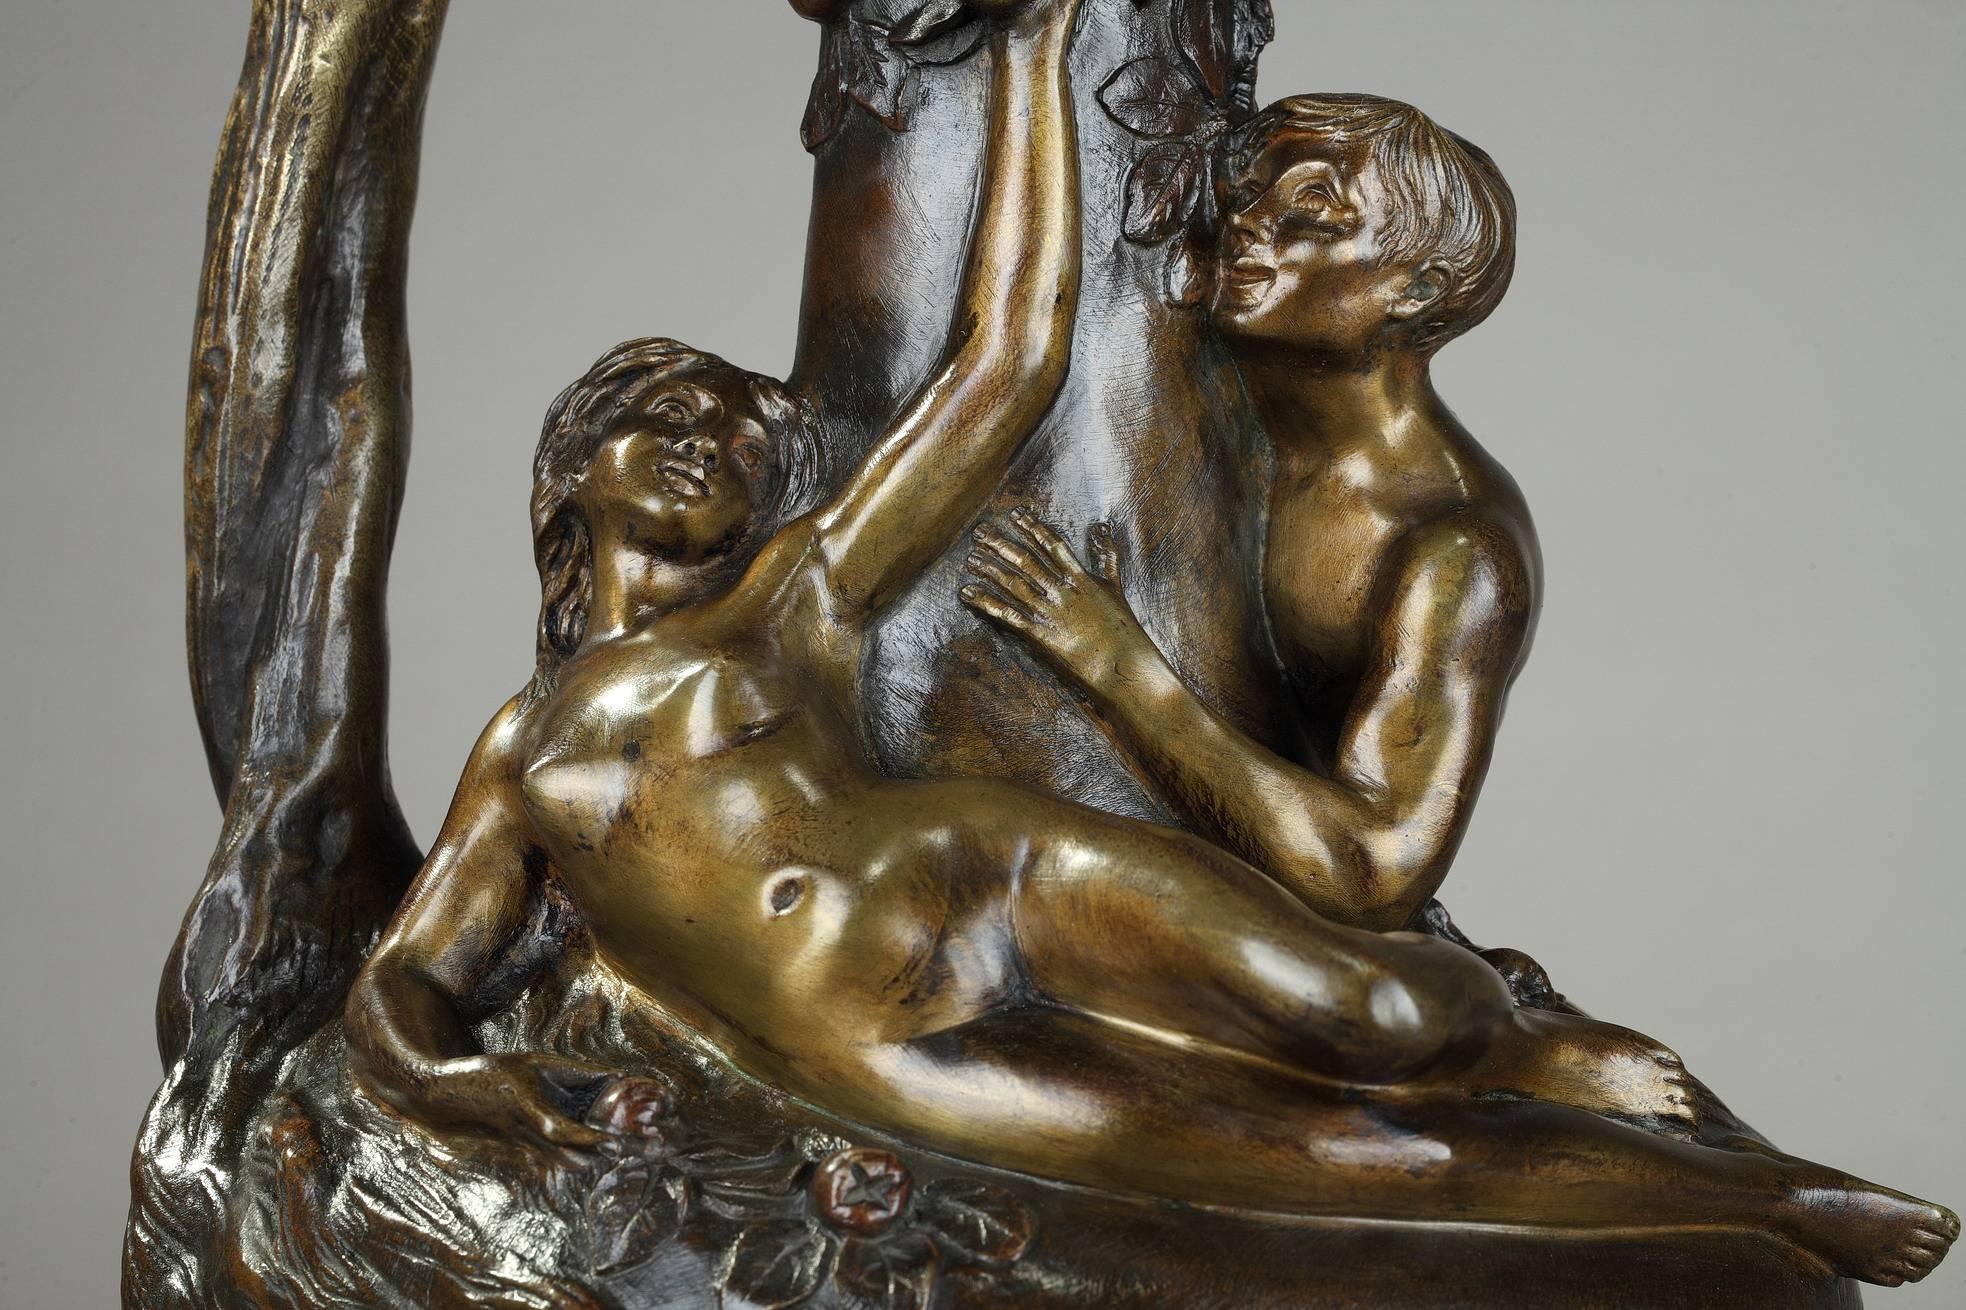 Patinated bronze ewer featuring Adam and Eve in the Garden of Eden. Eve is lying on the paunch of the ewer, while picking the forbidden fruit from the tree of good and evil. The trunk of the tree forms the handle. Signed on the paunch: Victor